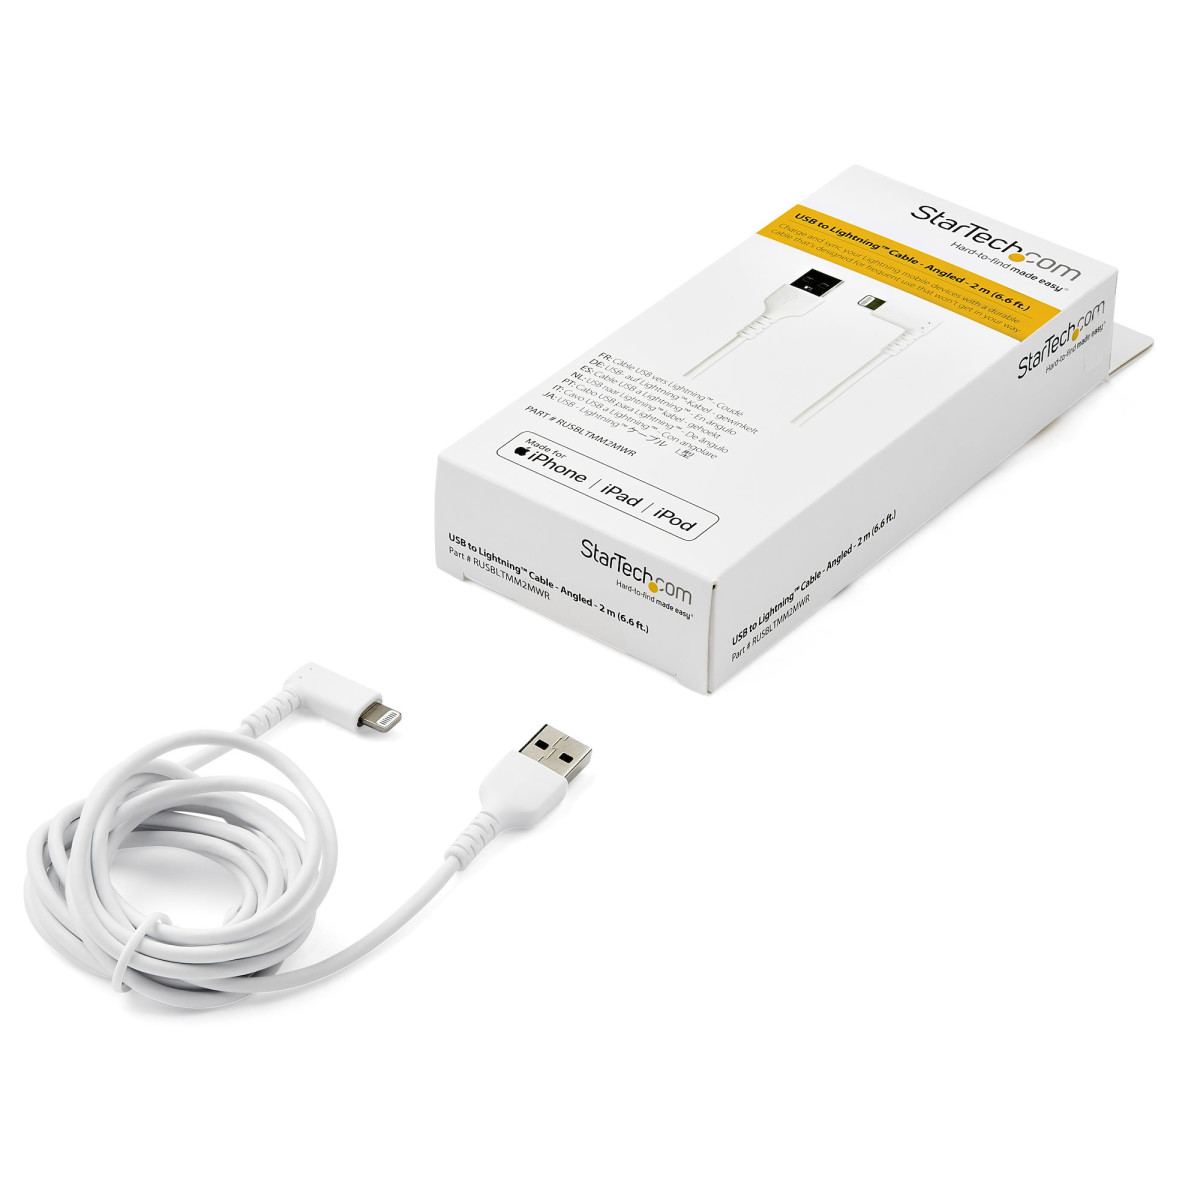 Cable - White Angled Lightning to USB 2m